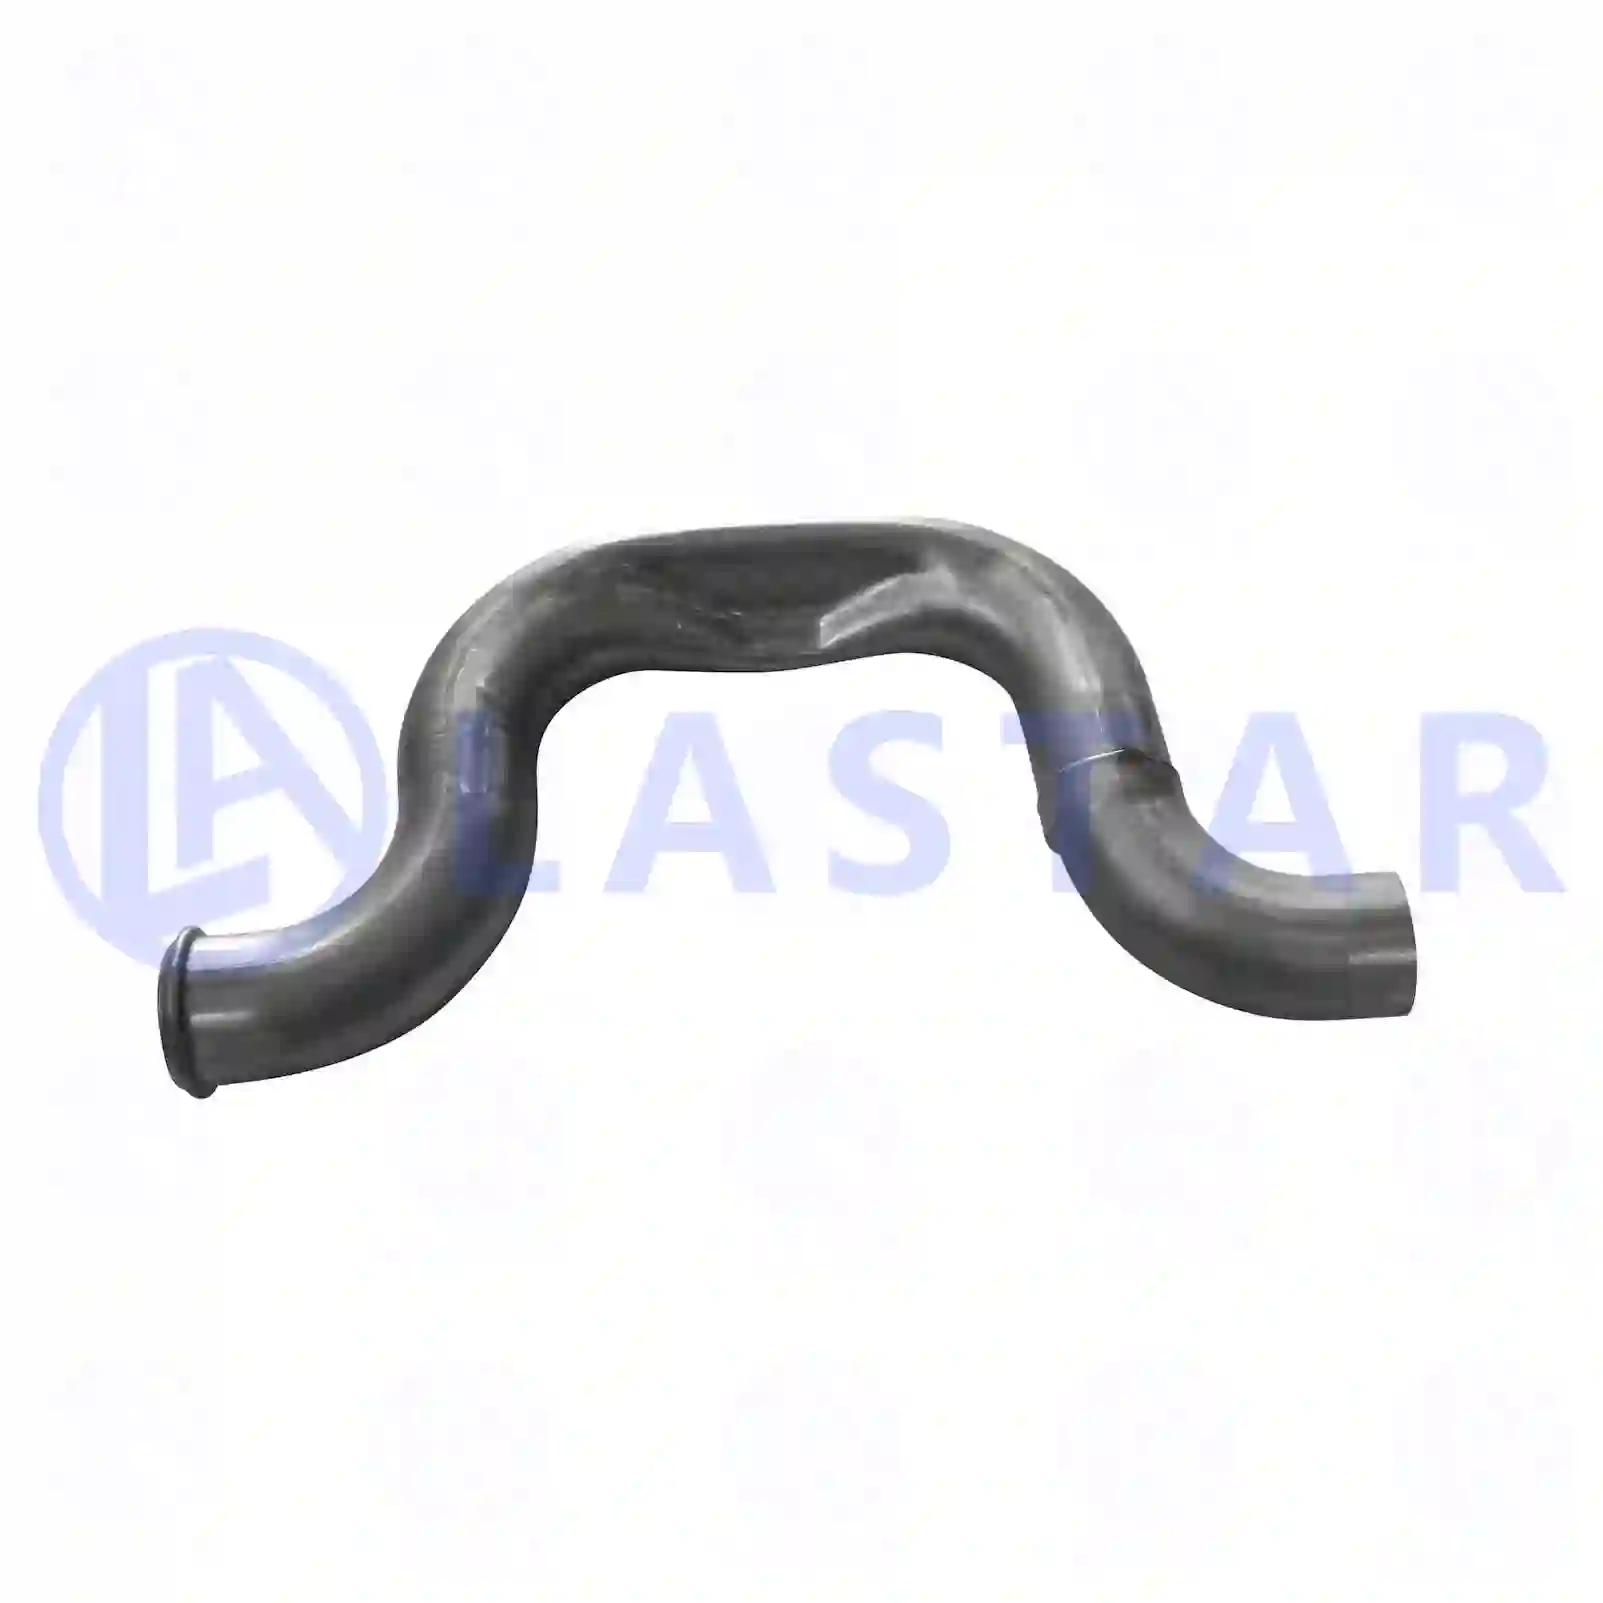 Front exhaust pipe, 77706877, 20428993 ||  77706877 Lastar Spare Part | Truck Spare Parts, Auotomotive Spare Parts Front exhaust pipe, 77706877, 20428993 ||  77706877 Lastar Spare Part | Truck Spare Parts, Auotomotive Spare Parts